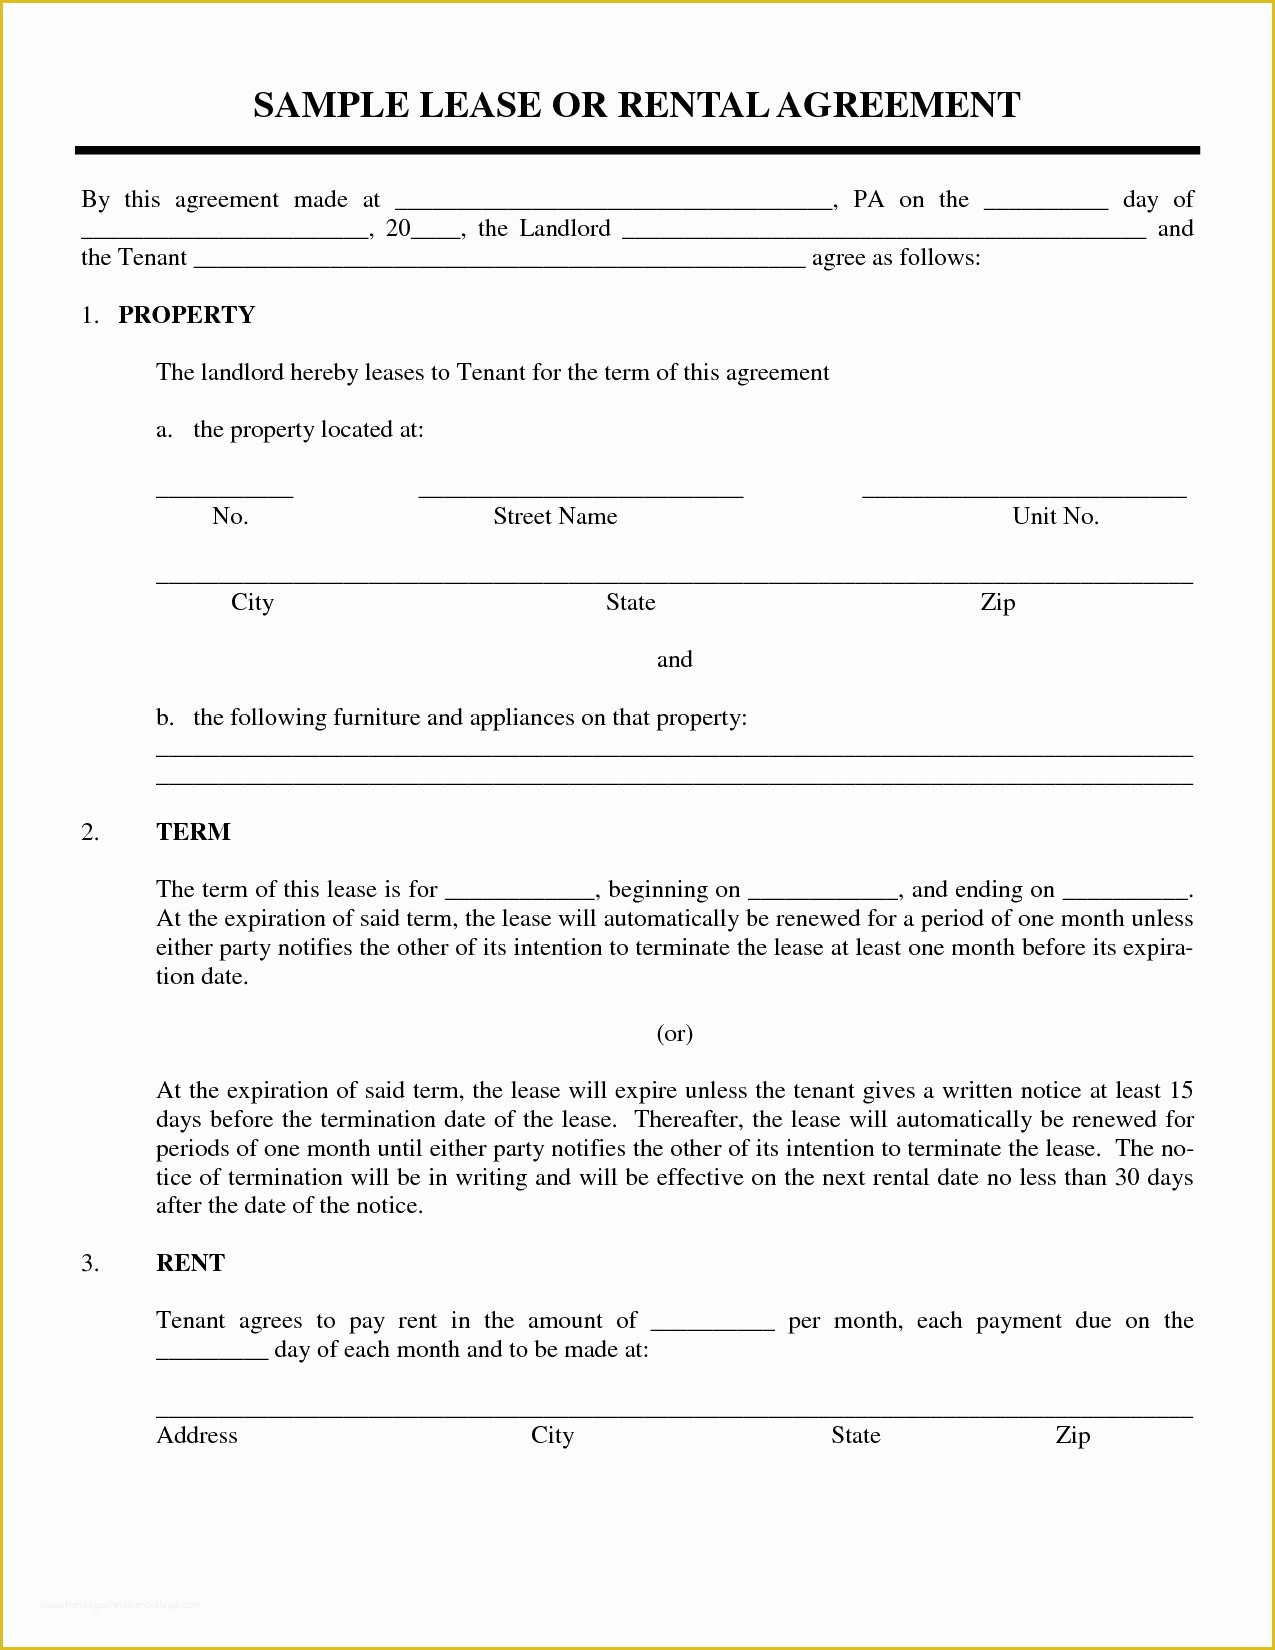 Free Sublet Lease Agreement Template Of Sample Lease or Rental Agreement